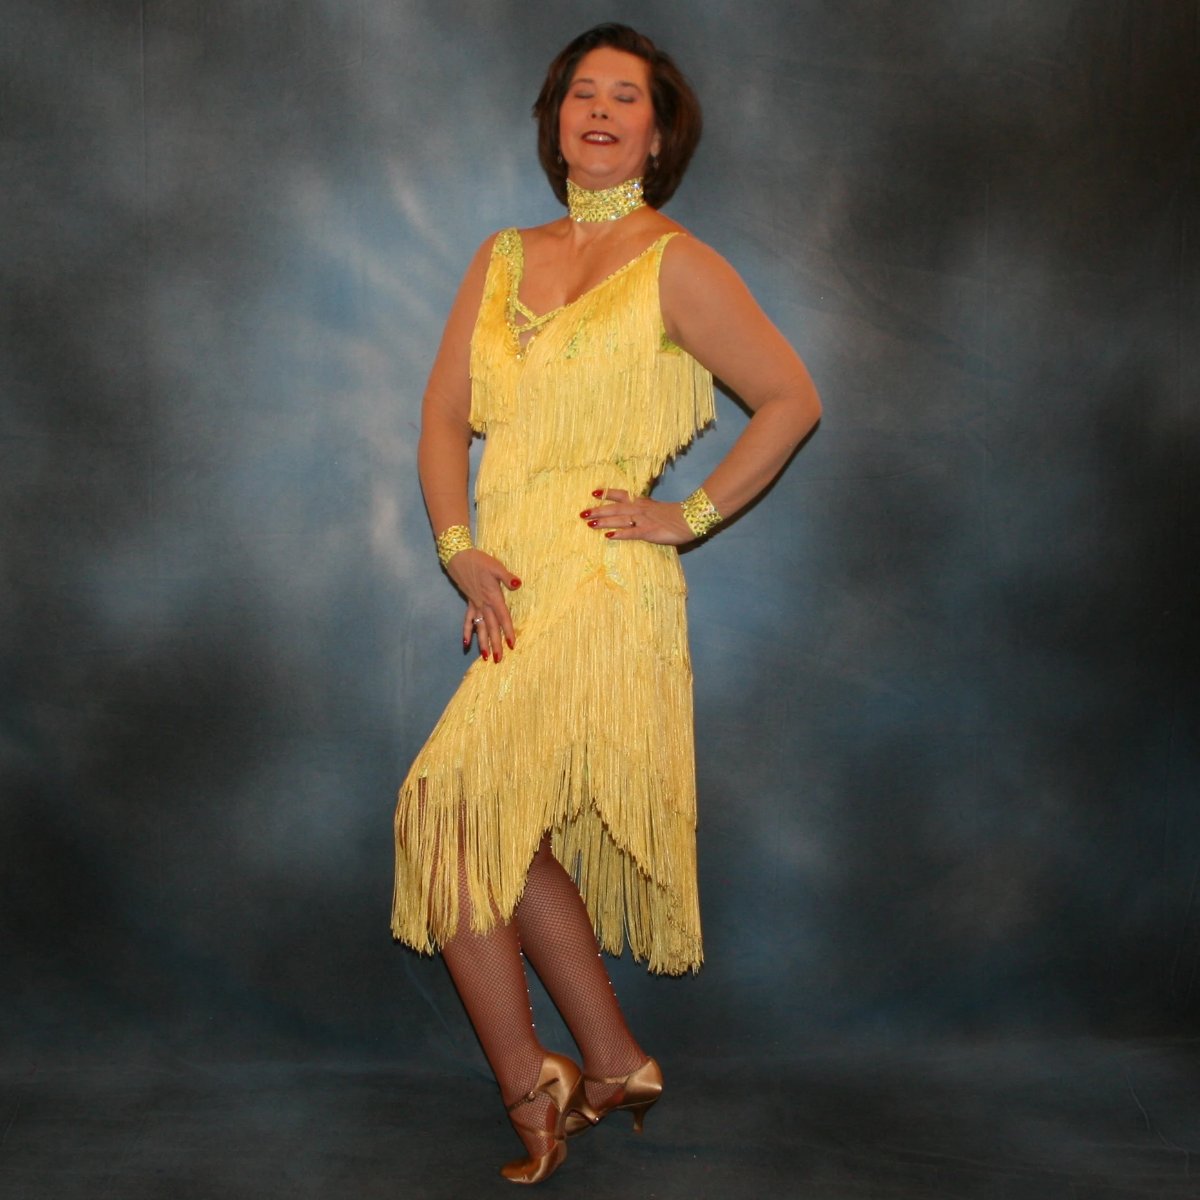 Crystal's Creations side view of Yellow Latin/rhythm fringe dress created in yellow splash metallic lycra with yards of chainette fringe, sheer nude illusion sleeves, embellished with jonquil Swarovski rhinestones.